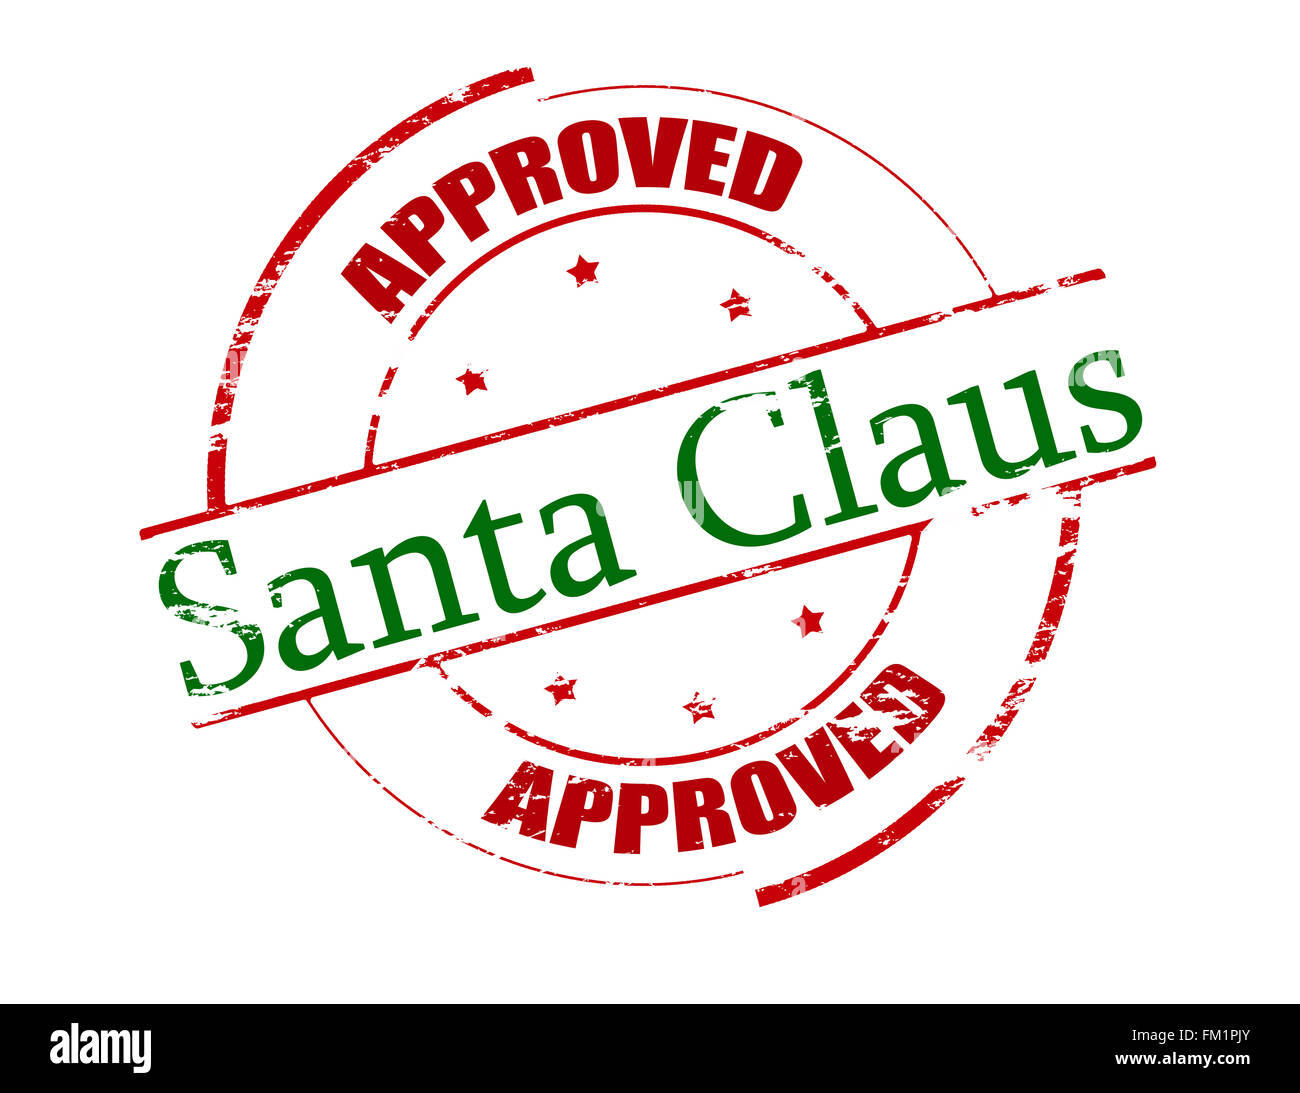 Rubber Stamp With Text Santa Claus Approved Inside Vector Illustration Stock Photo Alamy